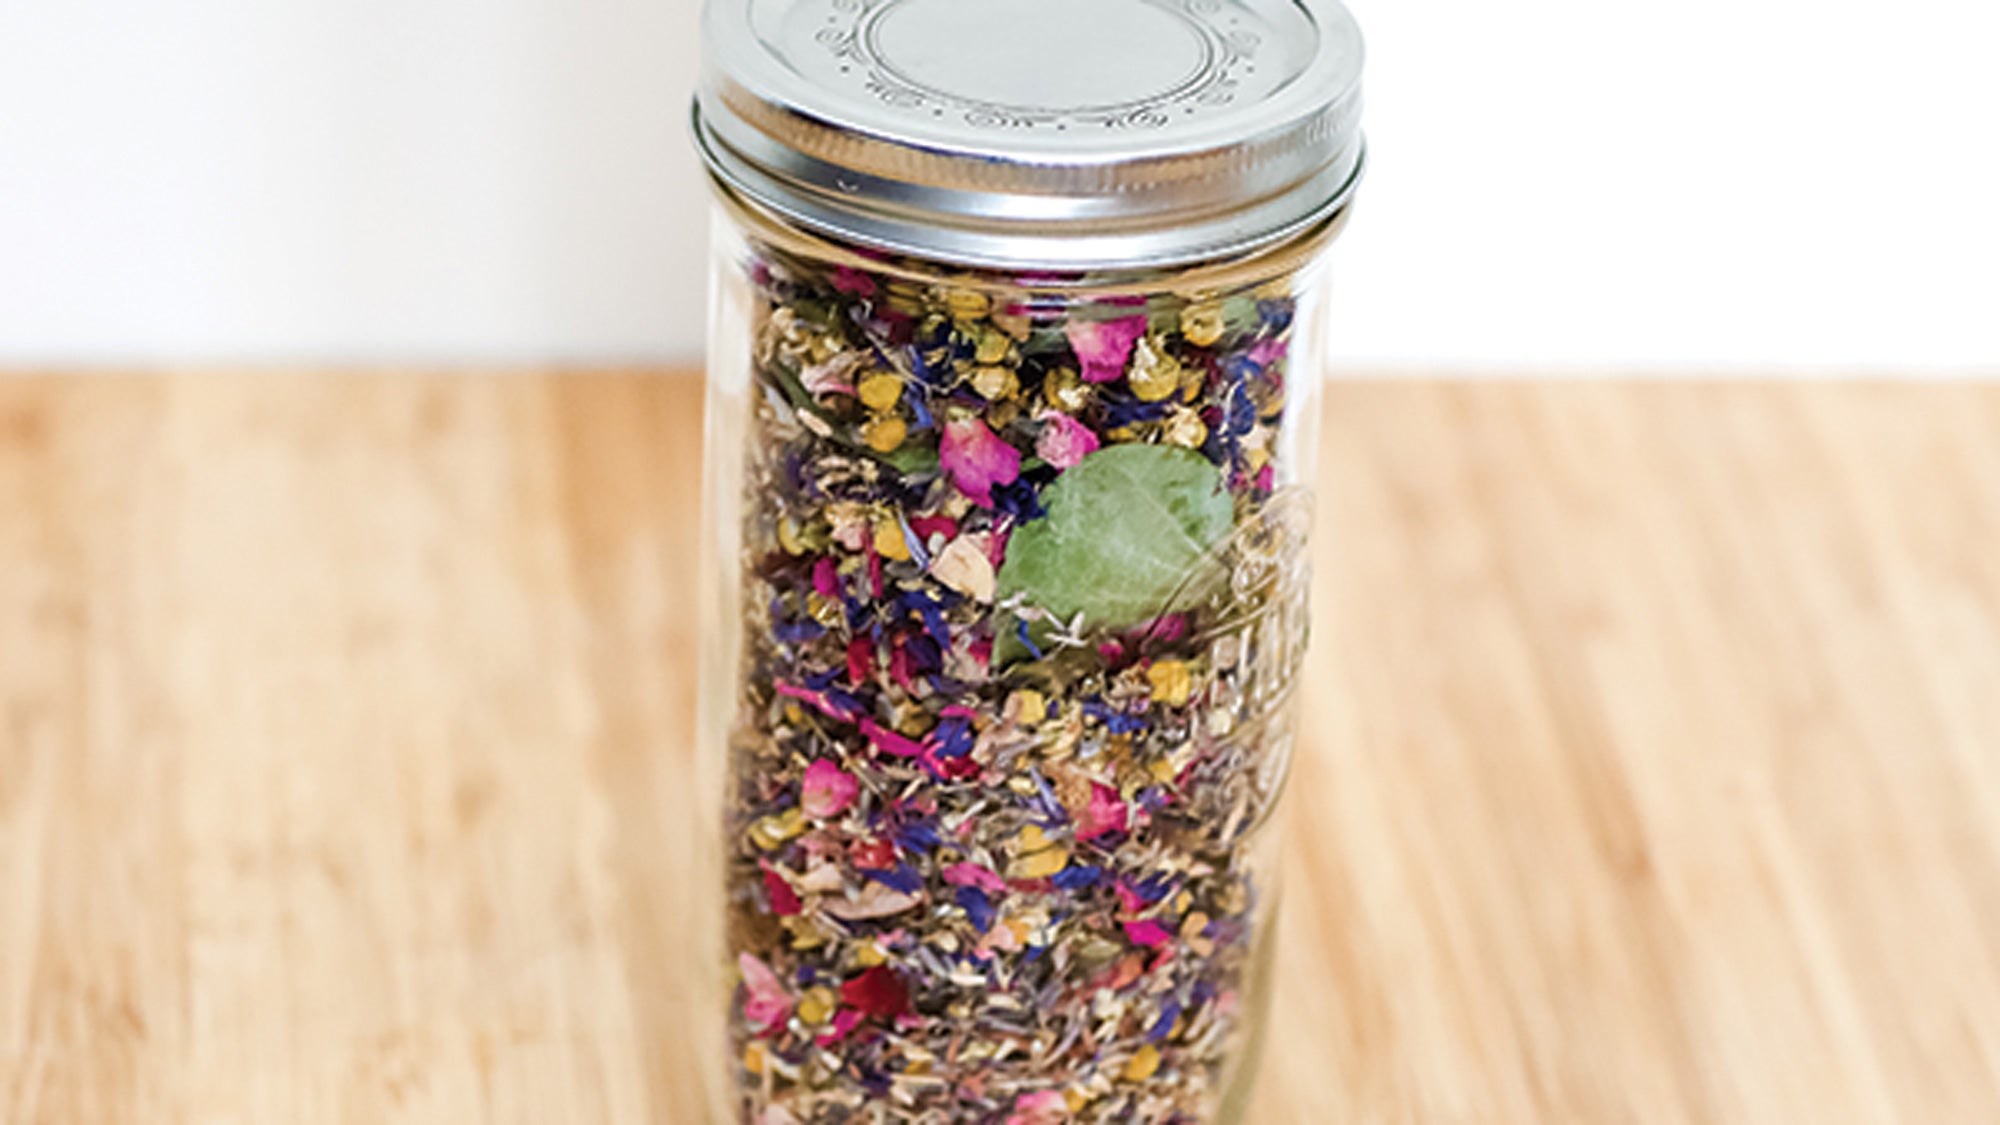 Homemade Floral Sachets with Peonies Lavender and Mint  Hearth and Vine